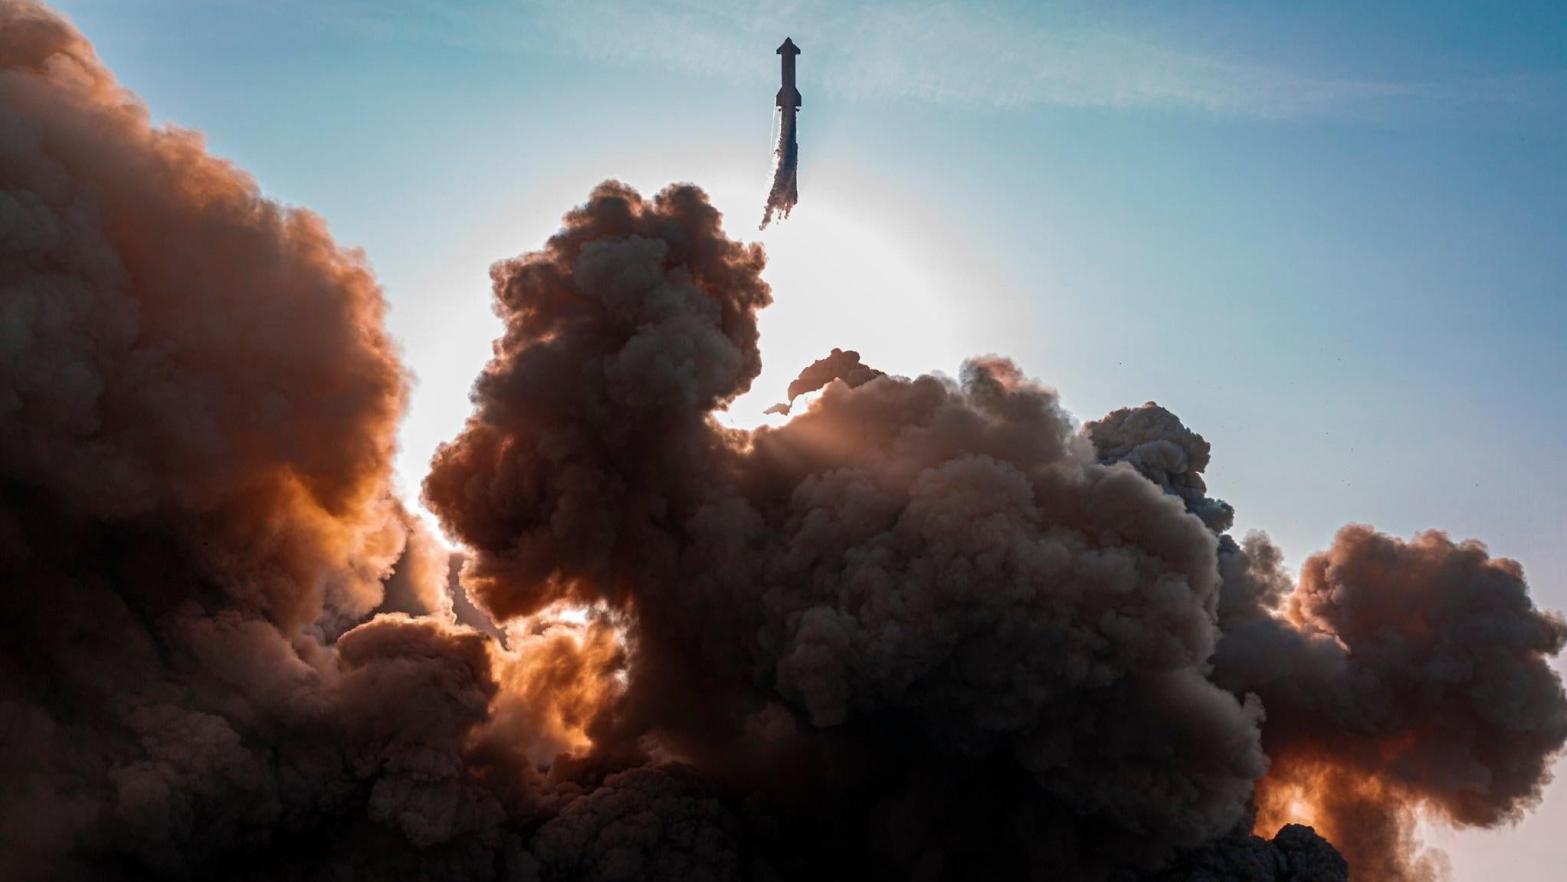 The inaugural launch of Starship generated a massive cloud of dust and debris that spread to nearby areas — just one aspect of the rocket's maiden voyage that's prompted environmental concerns.  (Photo: SpaceX)